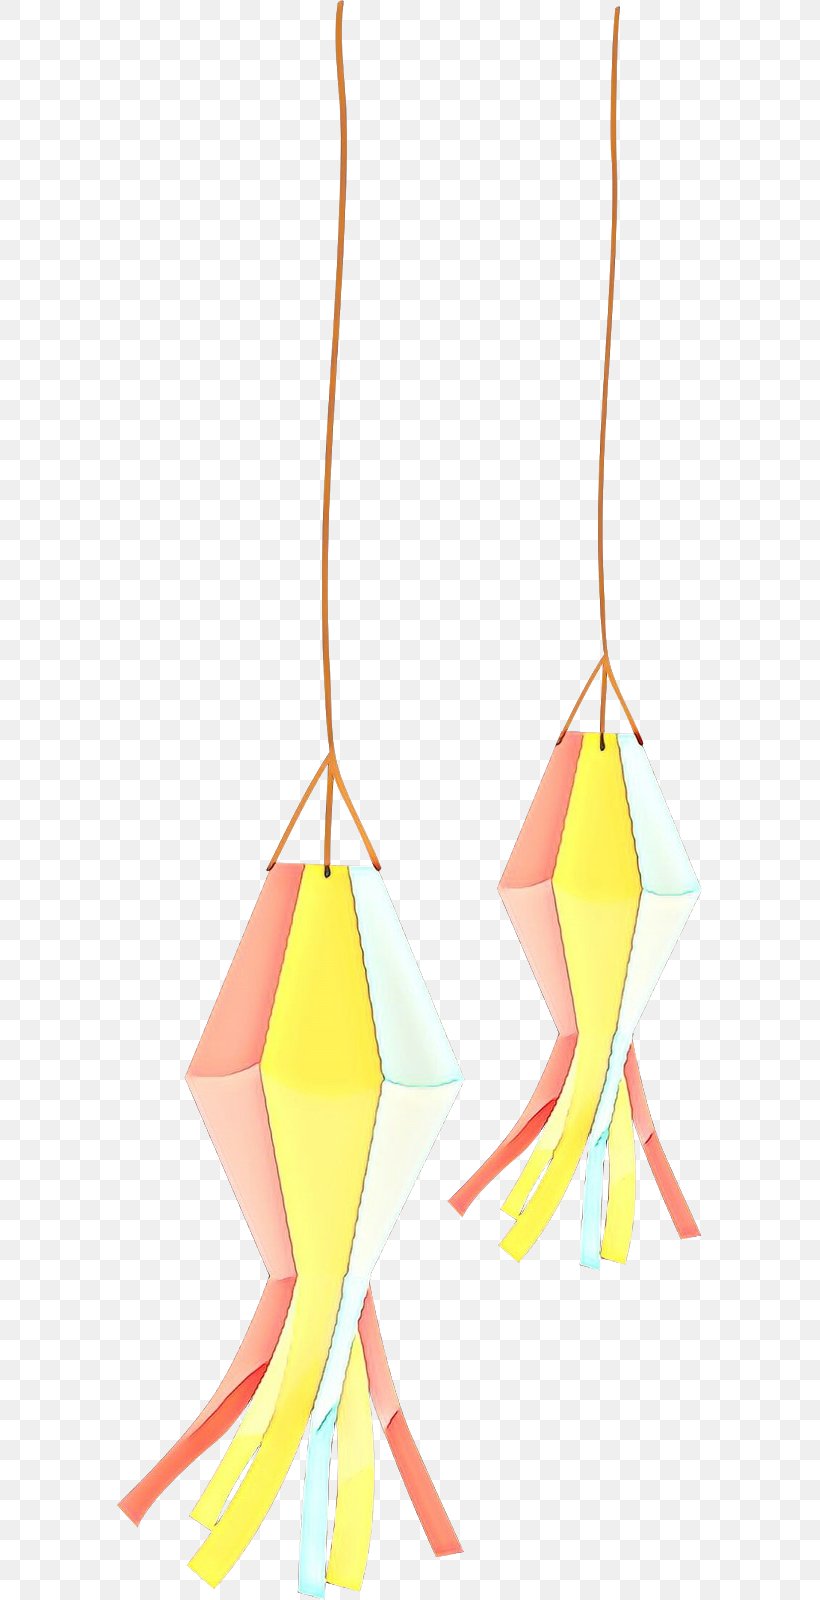 Yellow Triangle Paper Triangle Paper Product, PNG, 585x1600px, Cartoon, Paper, Paper Product, Swimsuit Top, Triangle Download Free